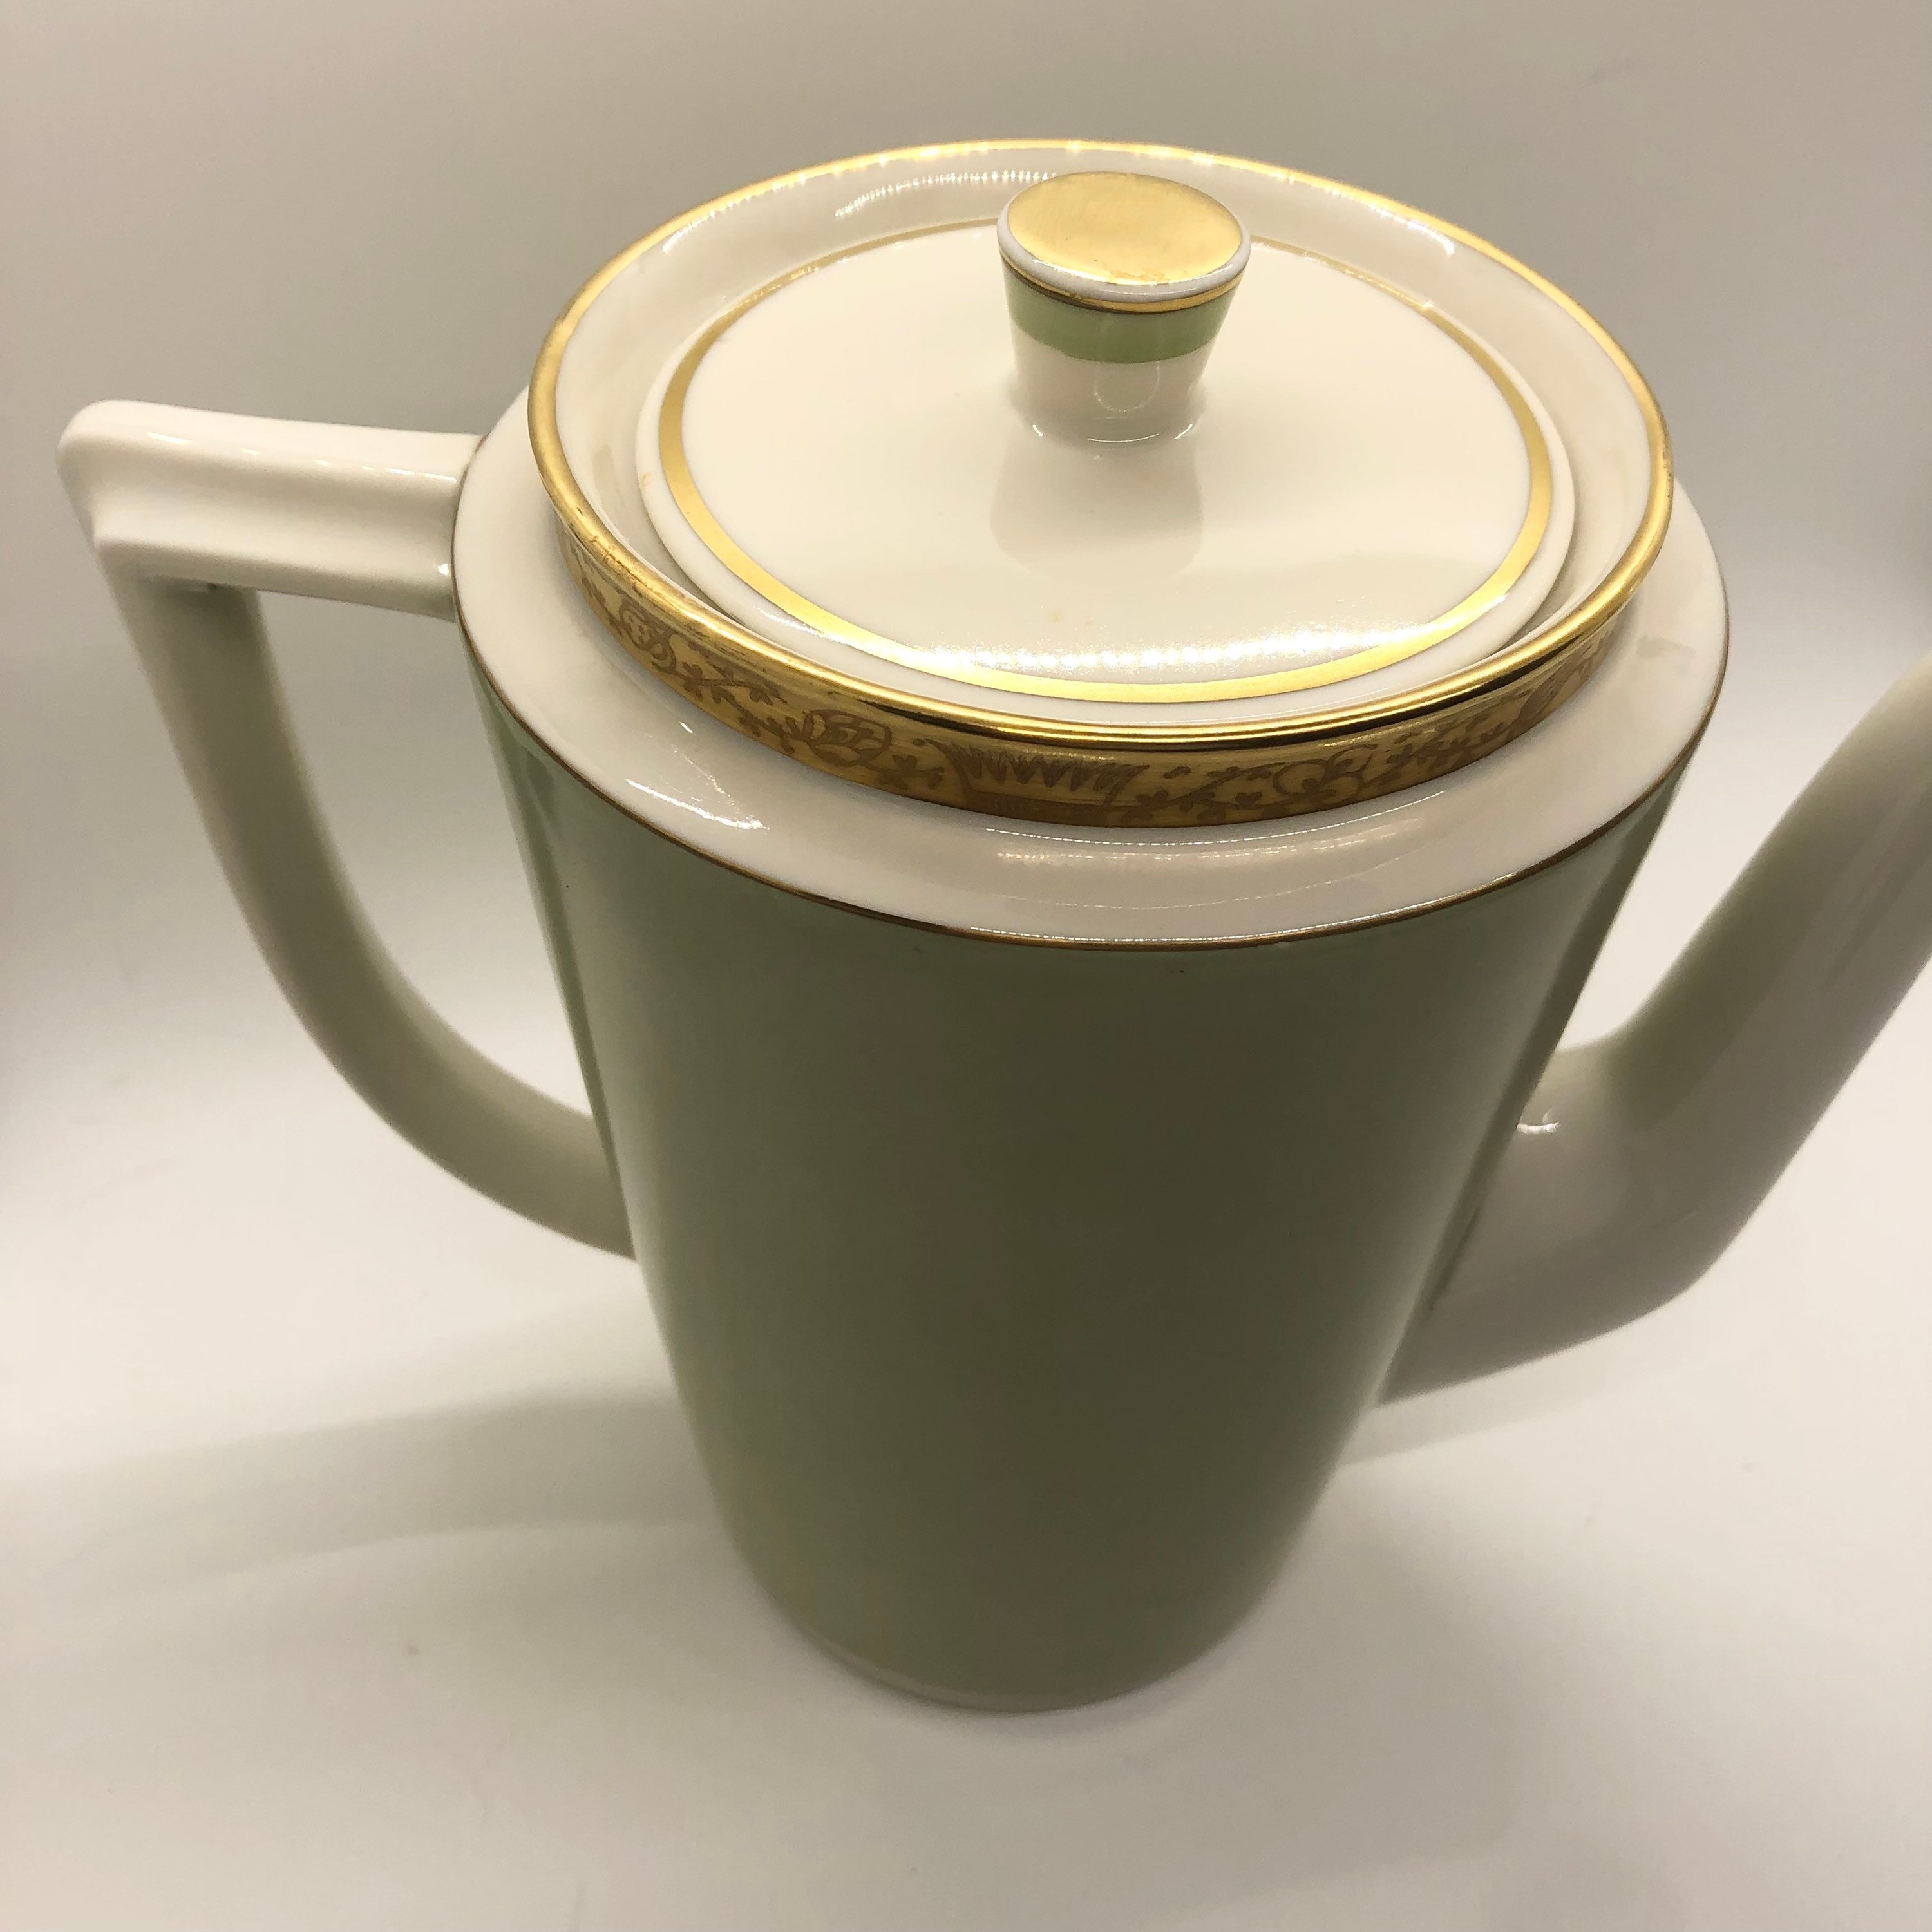 Coffee  Pot Royal Copenhagen Dagmar 9533 Green and White with Gold Good vintage condition